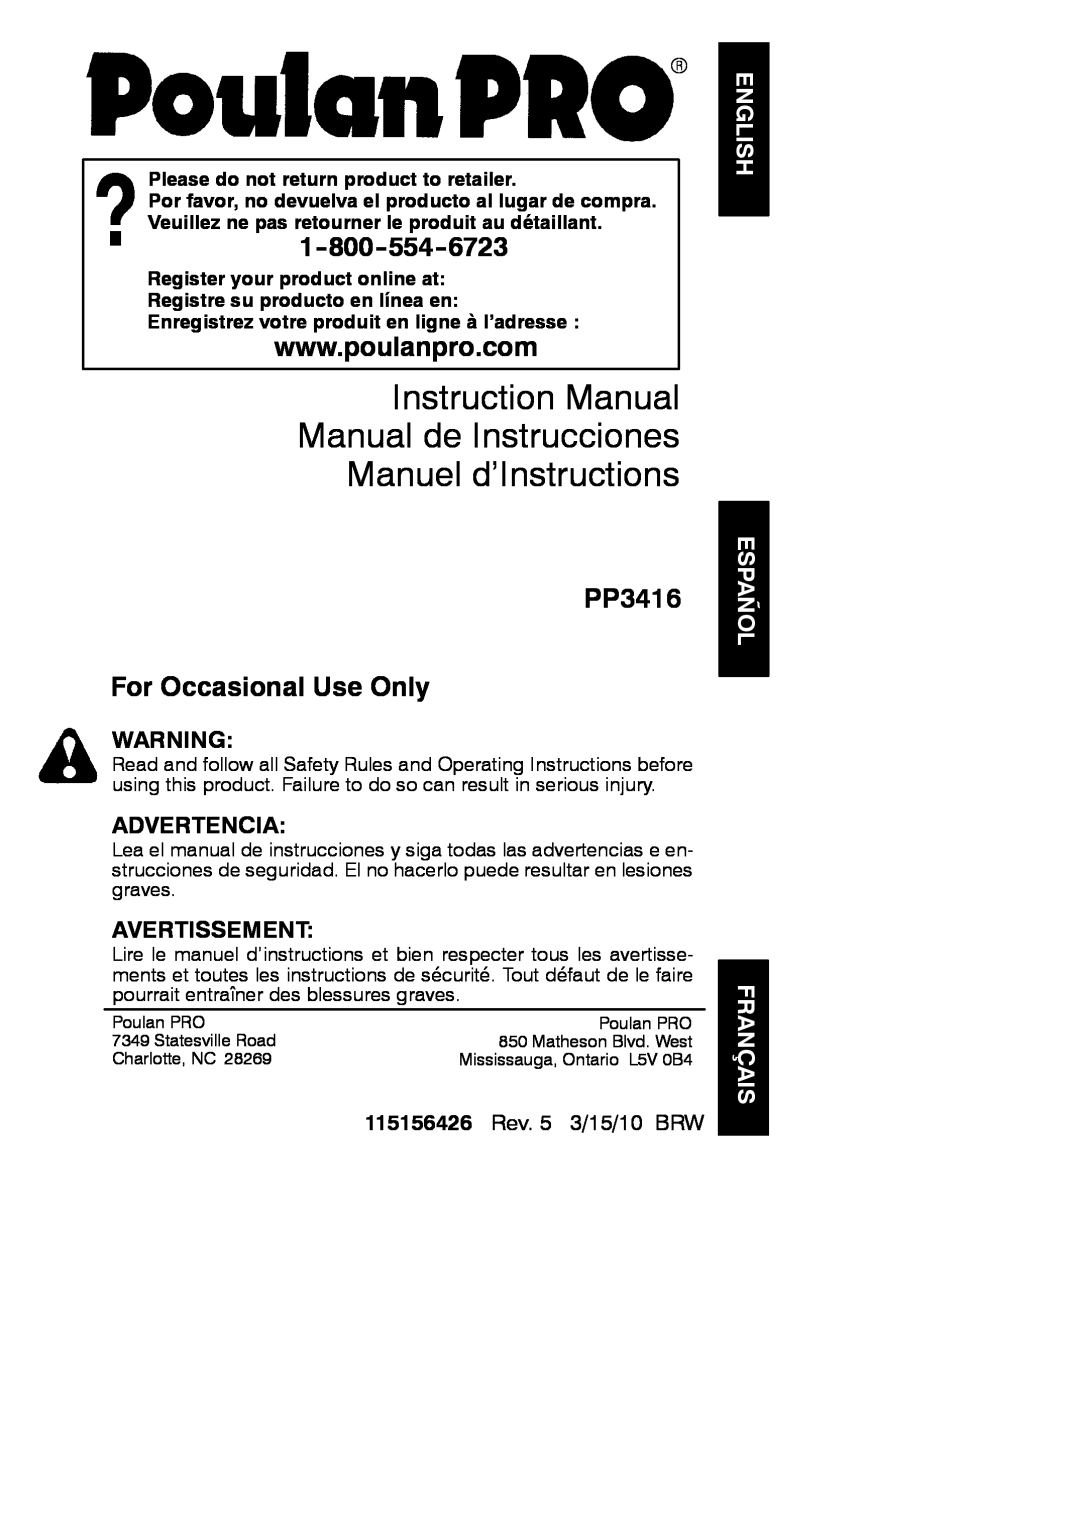 Poulan 966063001 instruction manual English, Español Français, PP3416 For Occasional Use Only, Advertencia, Avertissement 